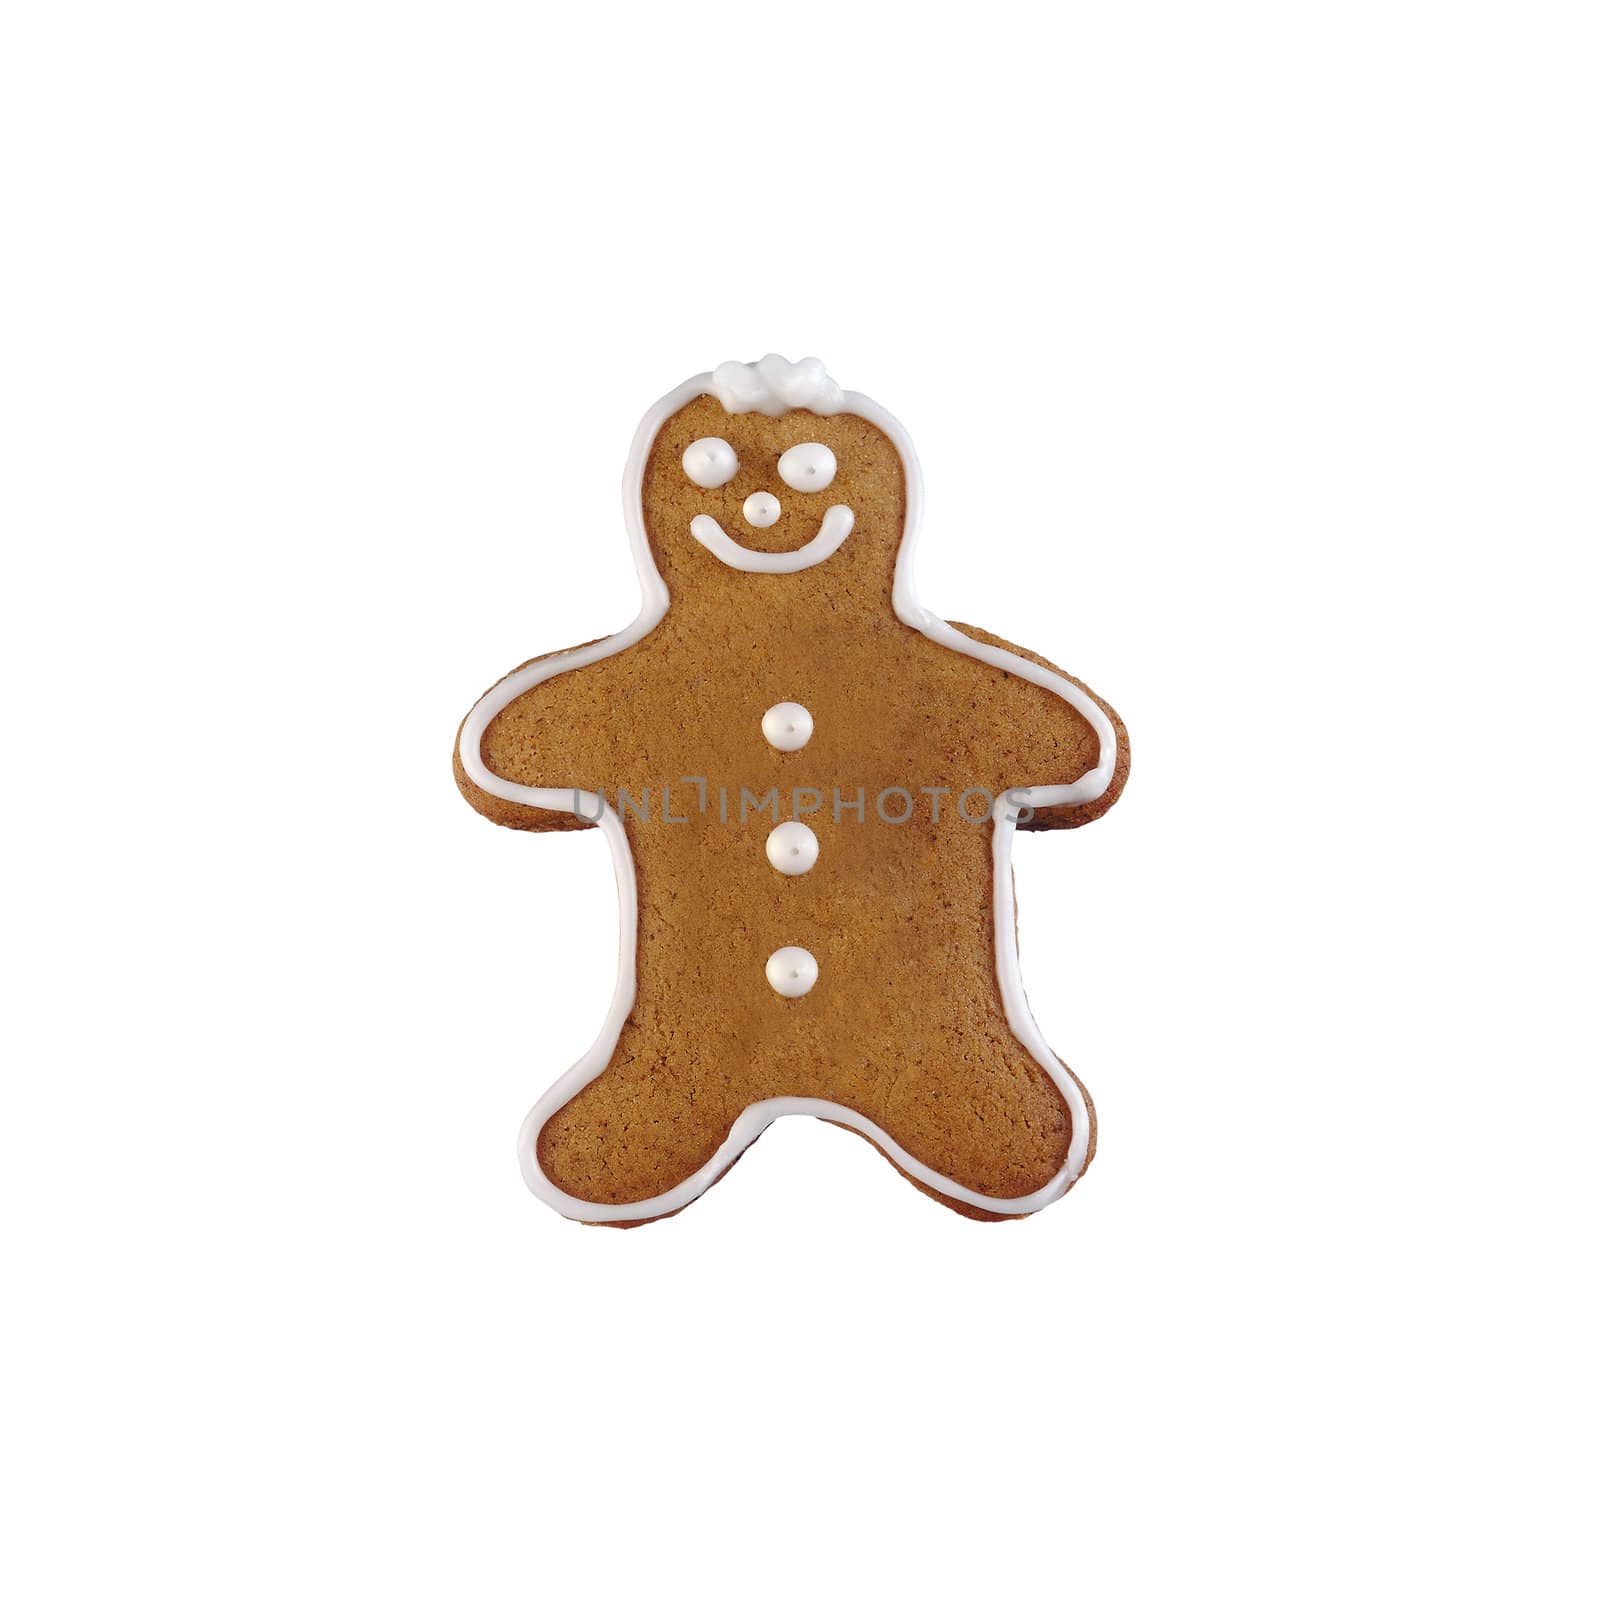 gingerbread man isolated